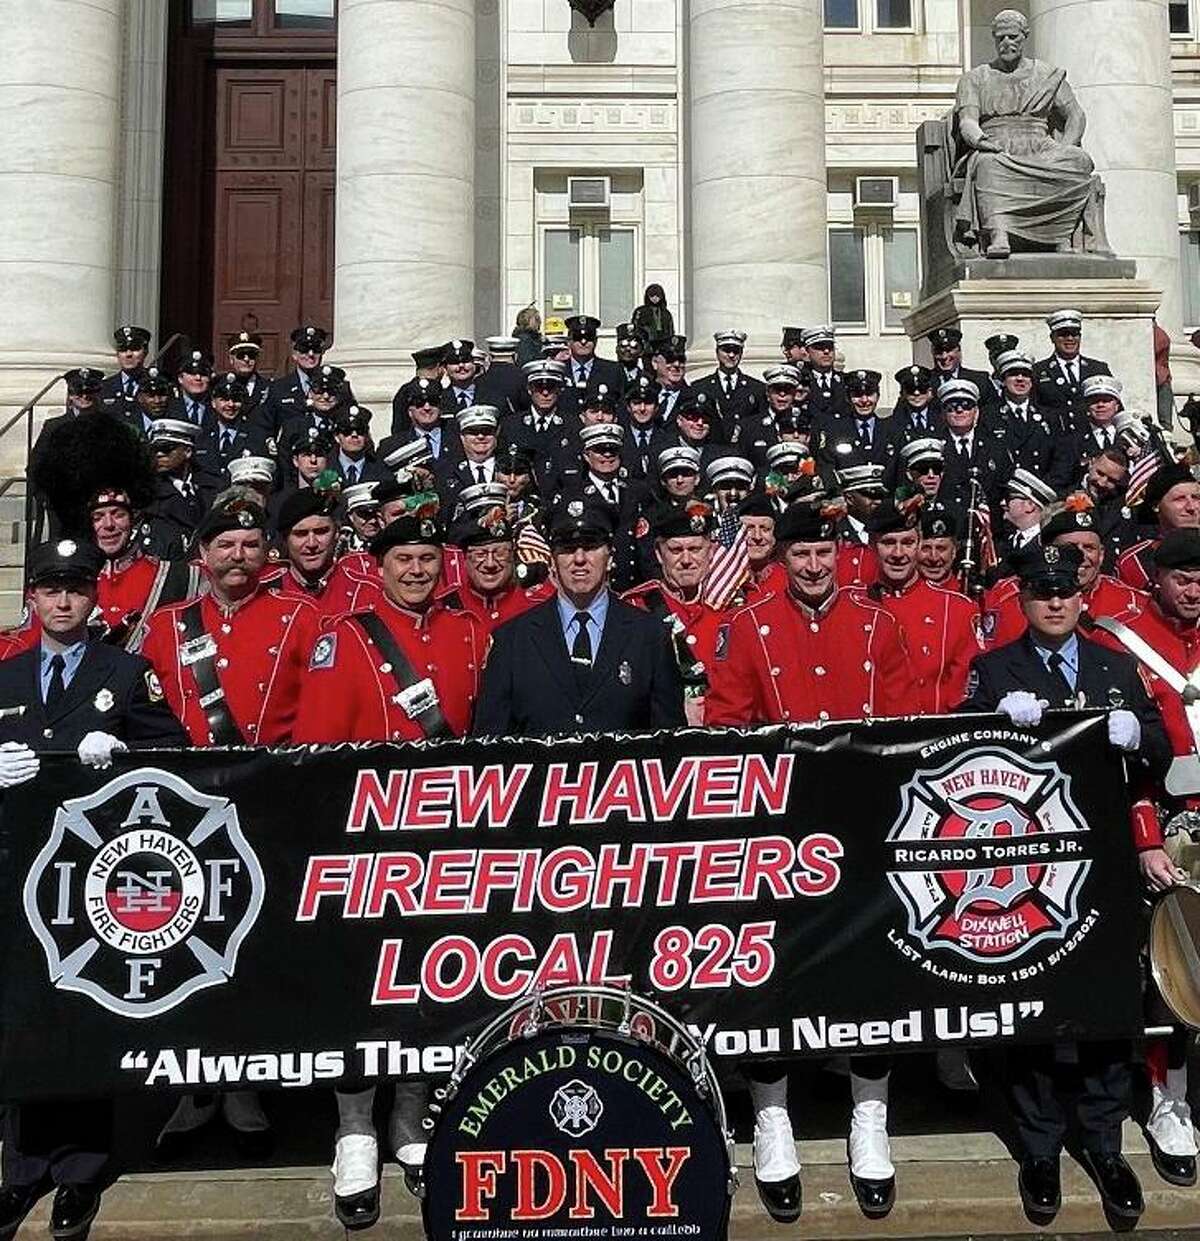 Members of the New York City Fire Department, in red, joined New Haven Fire Department members at New Haven’s St. Patrick’s Day Parade Sunday in New Haven.